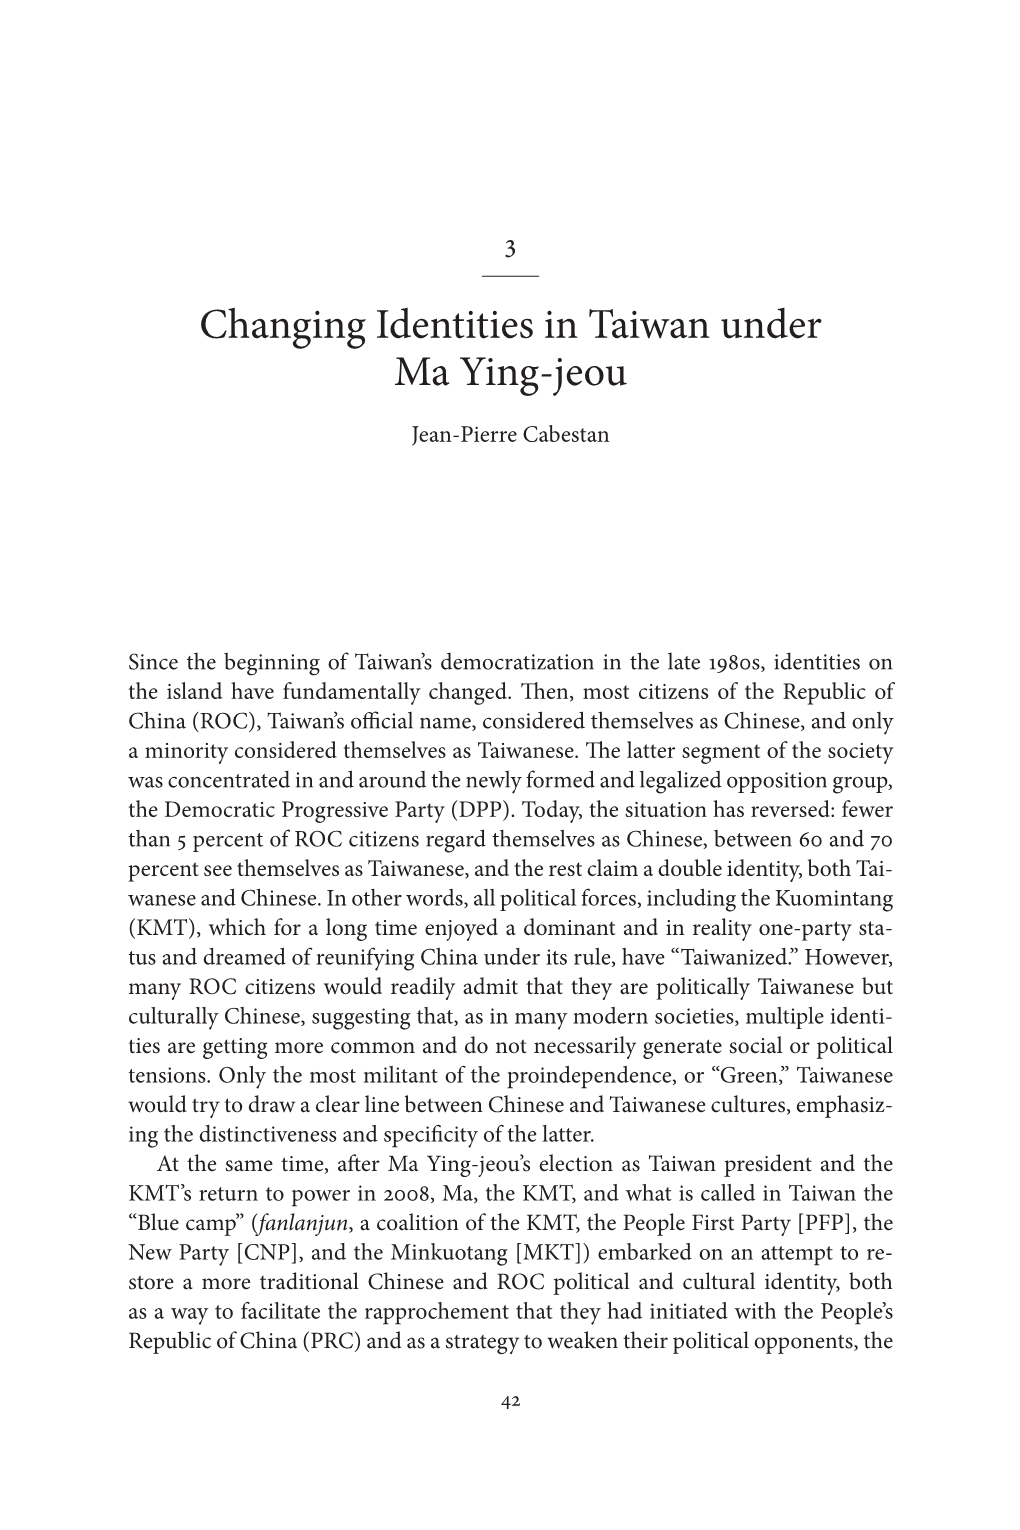 Changing Identities in Taiwan Under Ma Ying-Jeou